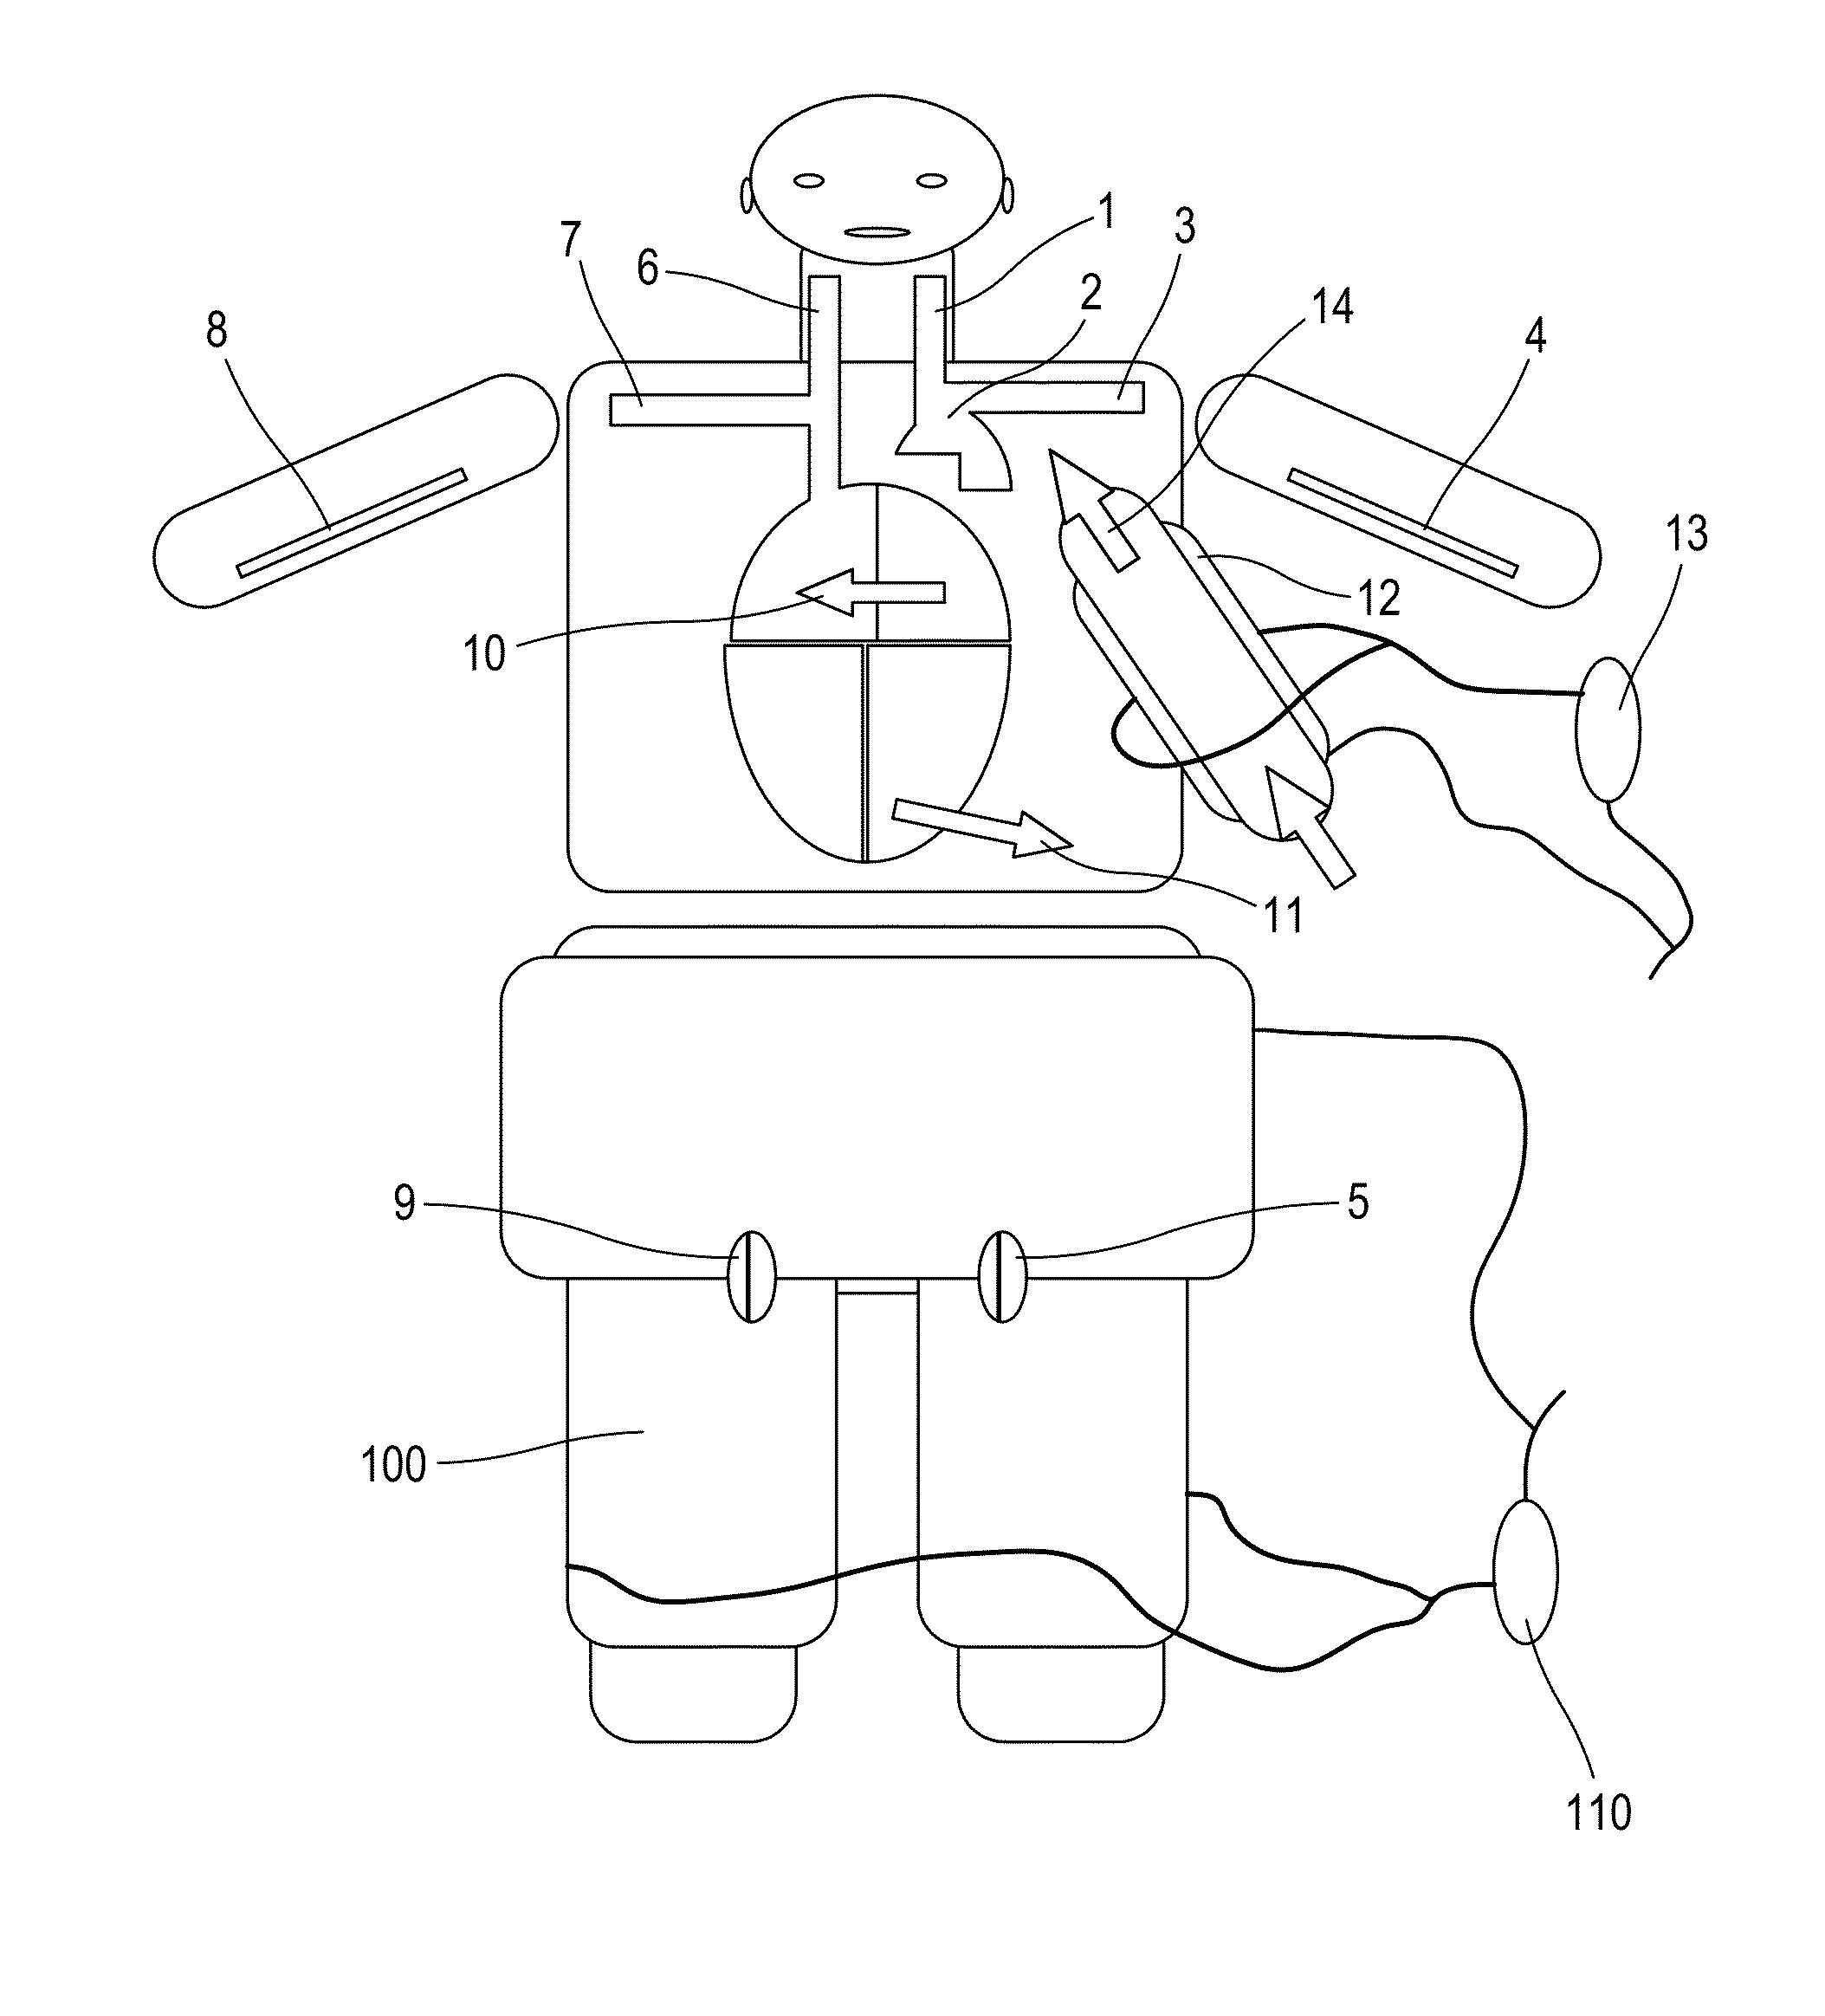 Therapeutic and surgical treatment method for providing cardiopulmonary and circulatory assist device